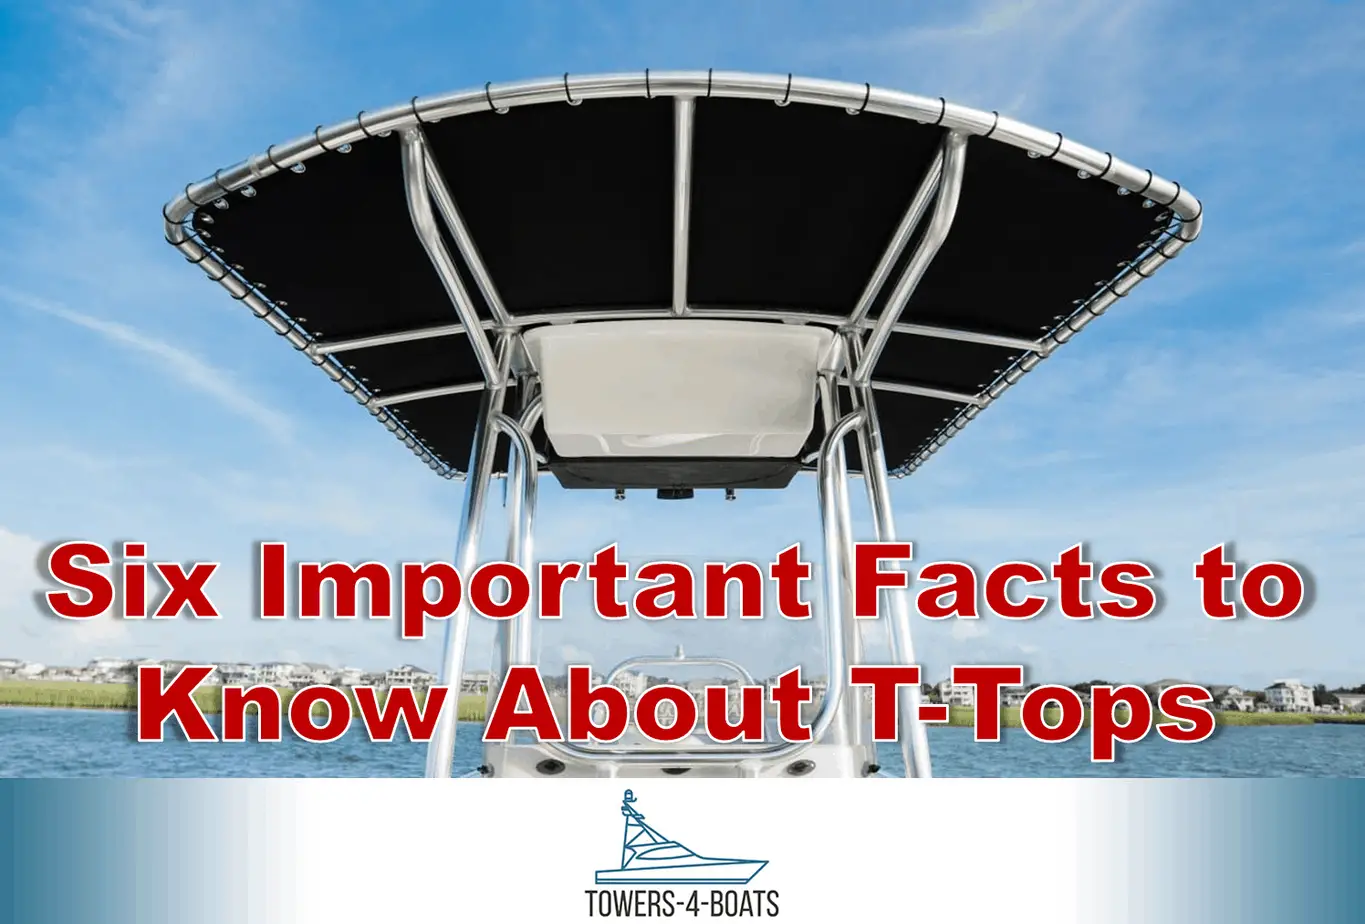 Six Important Facts to Know About T-Tops